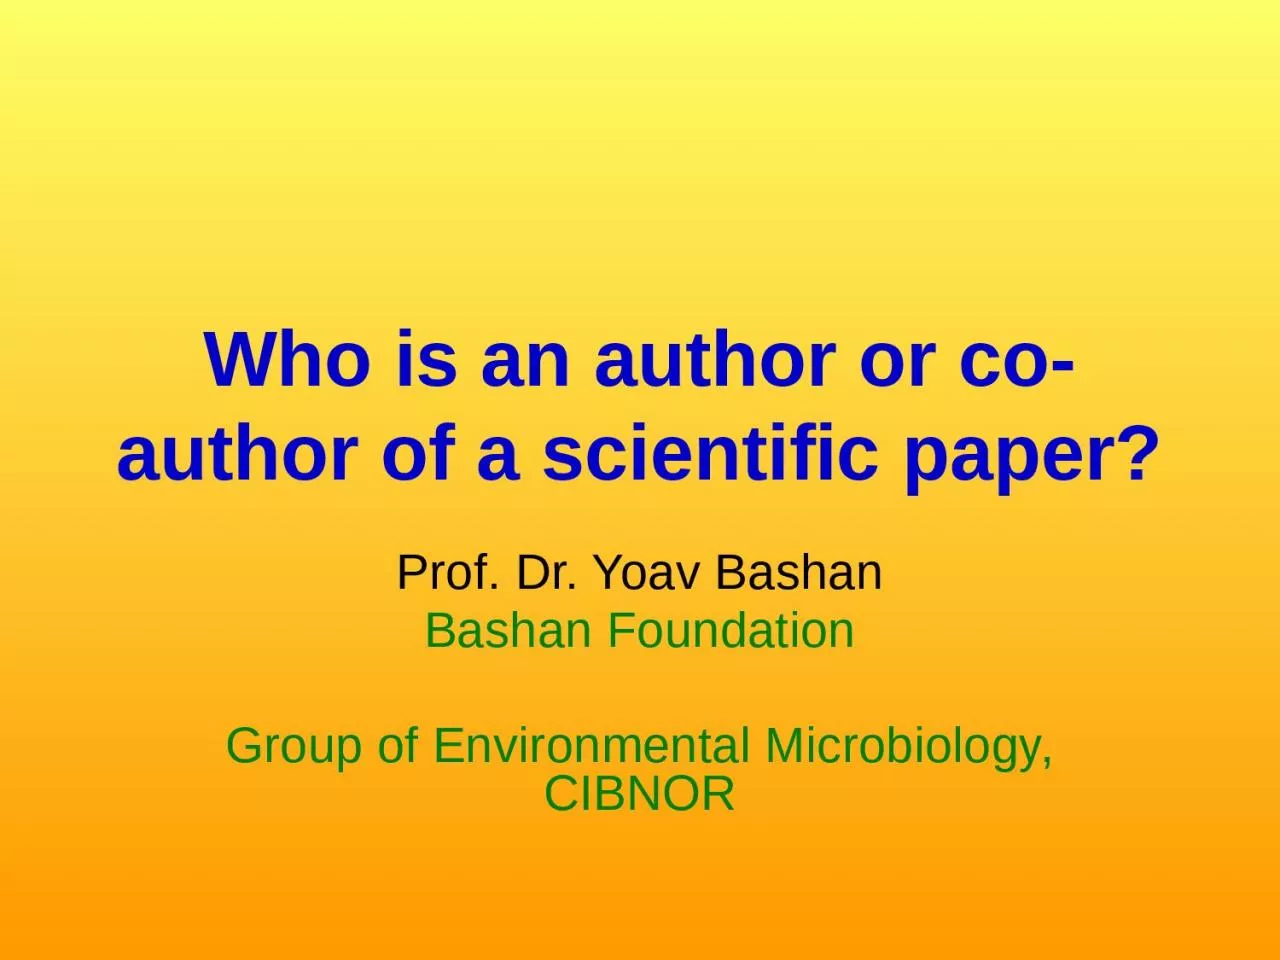 Who is an author or co-author of a scientific paper?